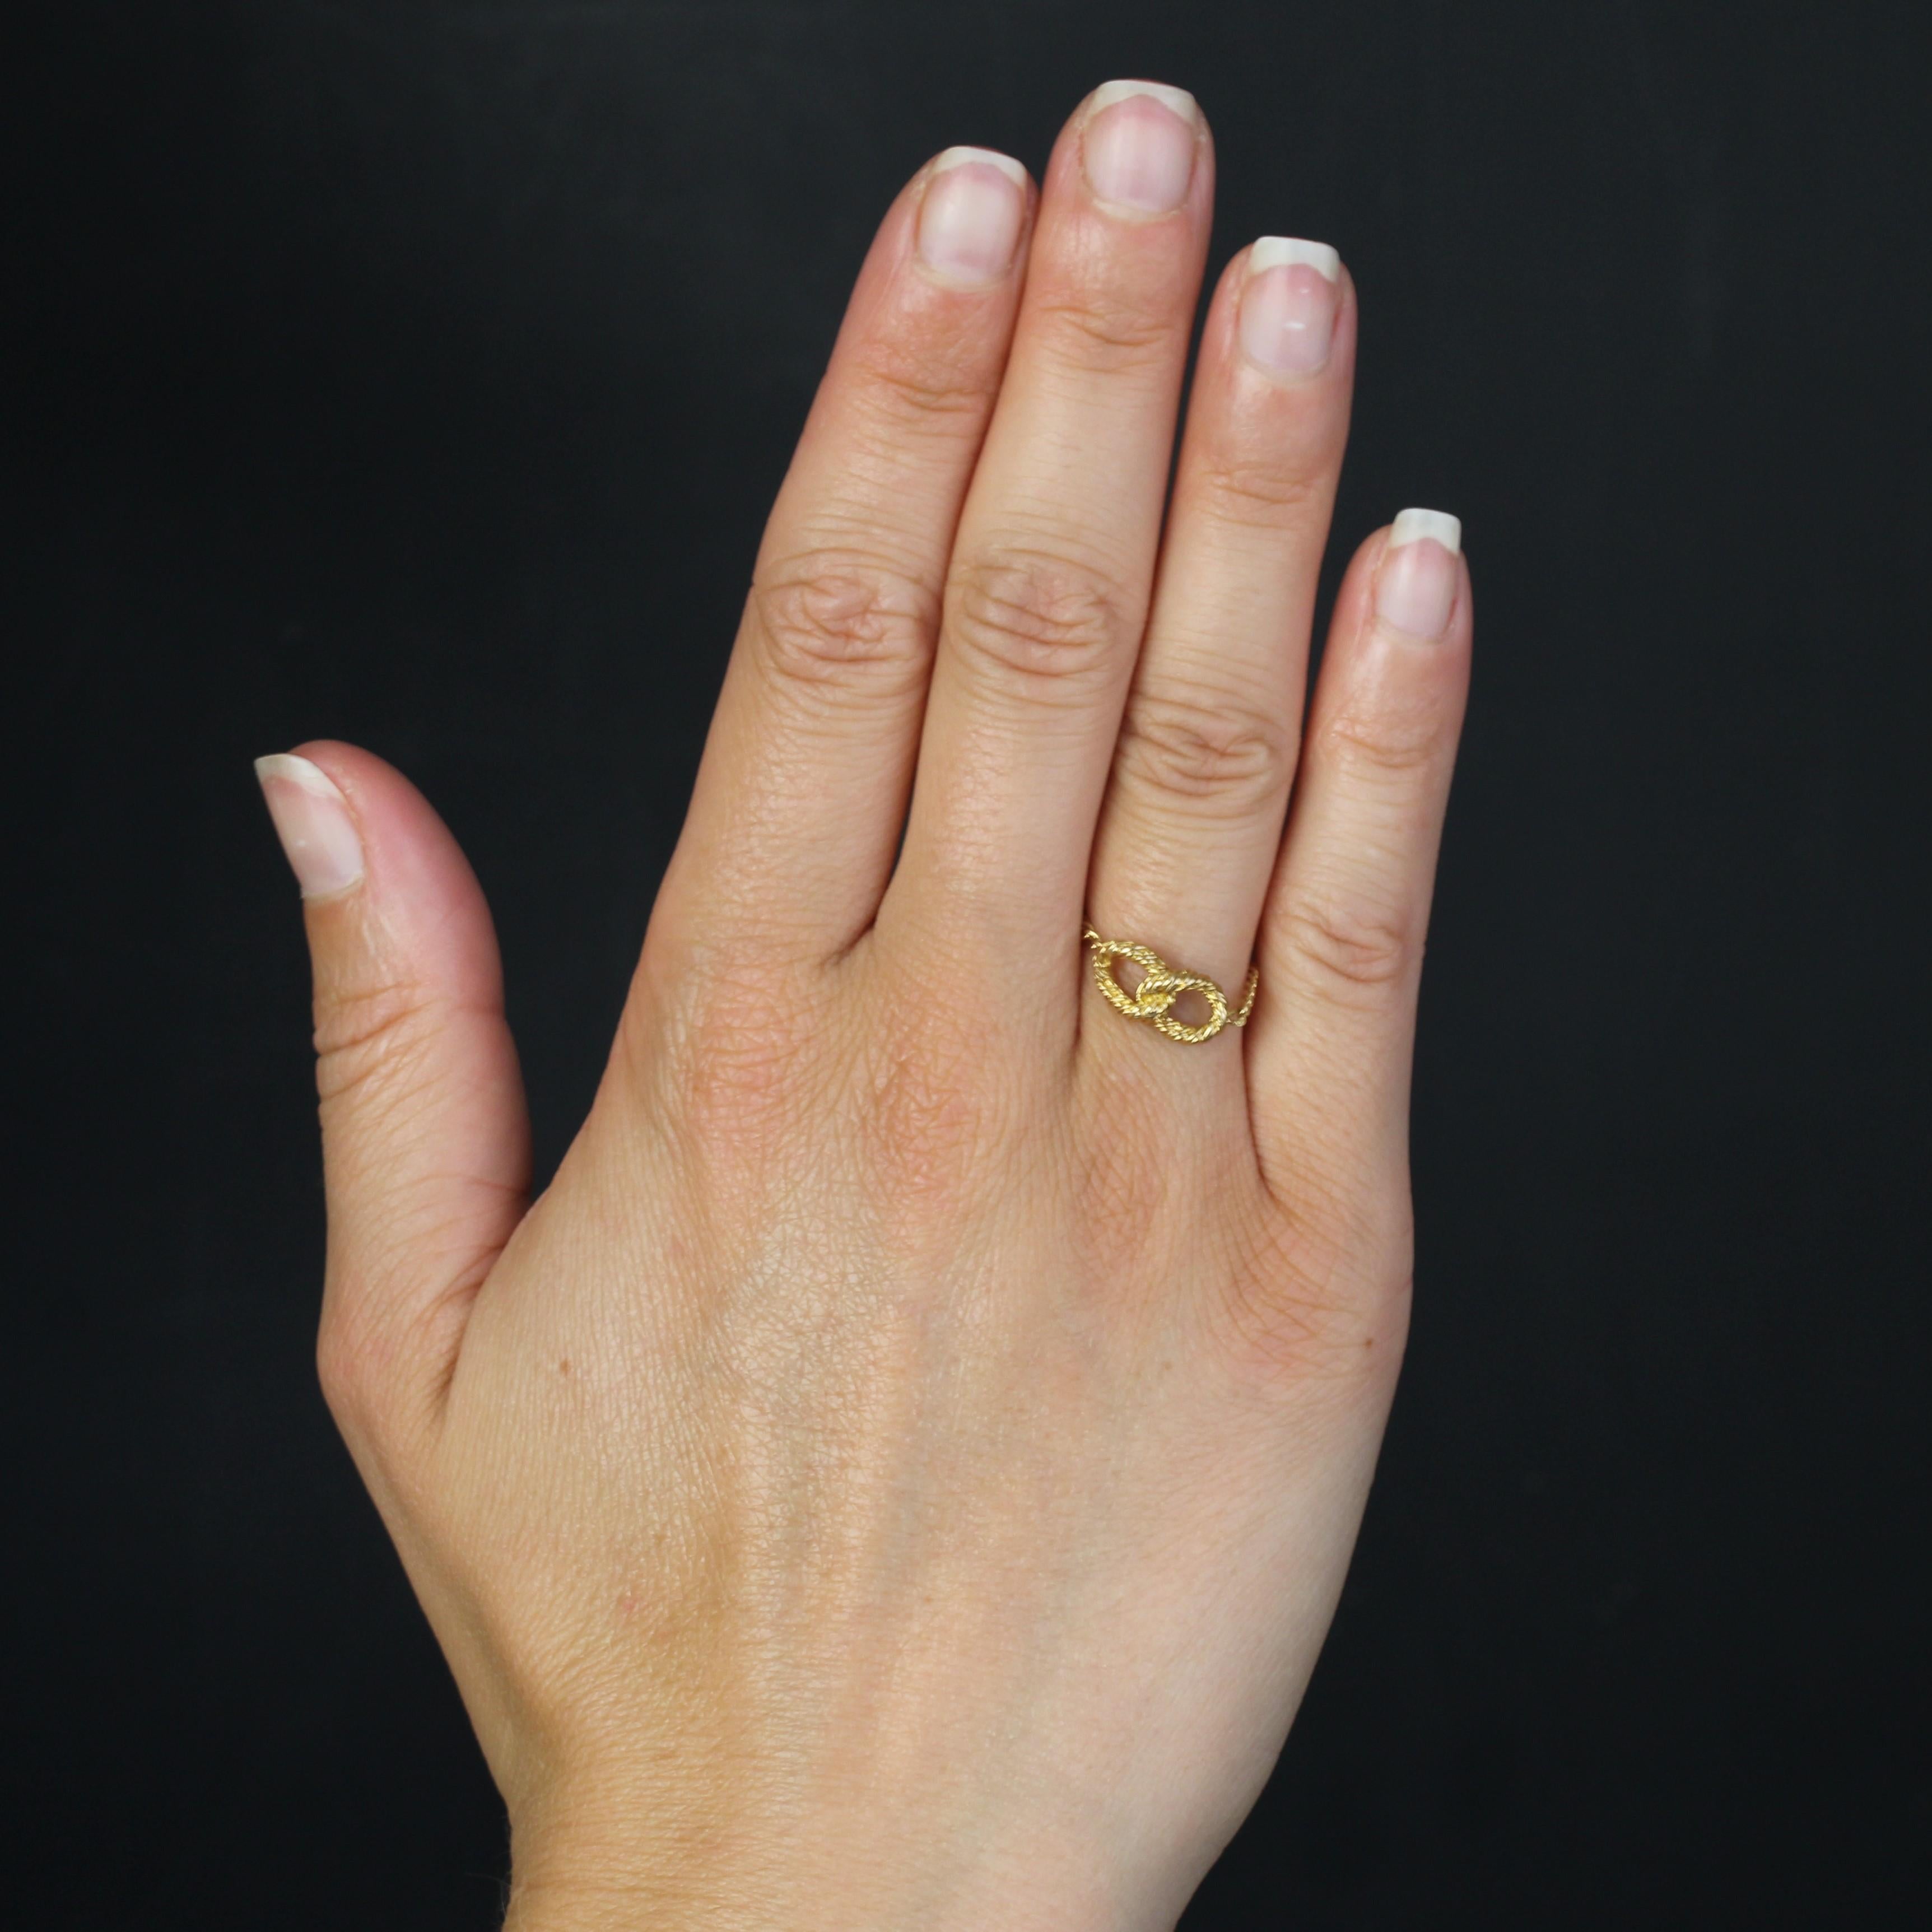 Ring in 18 karat yellow gold.
Yellow gold chain ring featuring a curb chain with two intertwined loops welded together in twisted yellow gold.
Height : 6,5 mm approximately, width : 13,5 mm approximately, thickness : 4 mm approximately, width of the